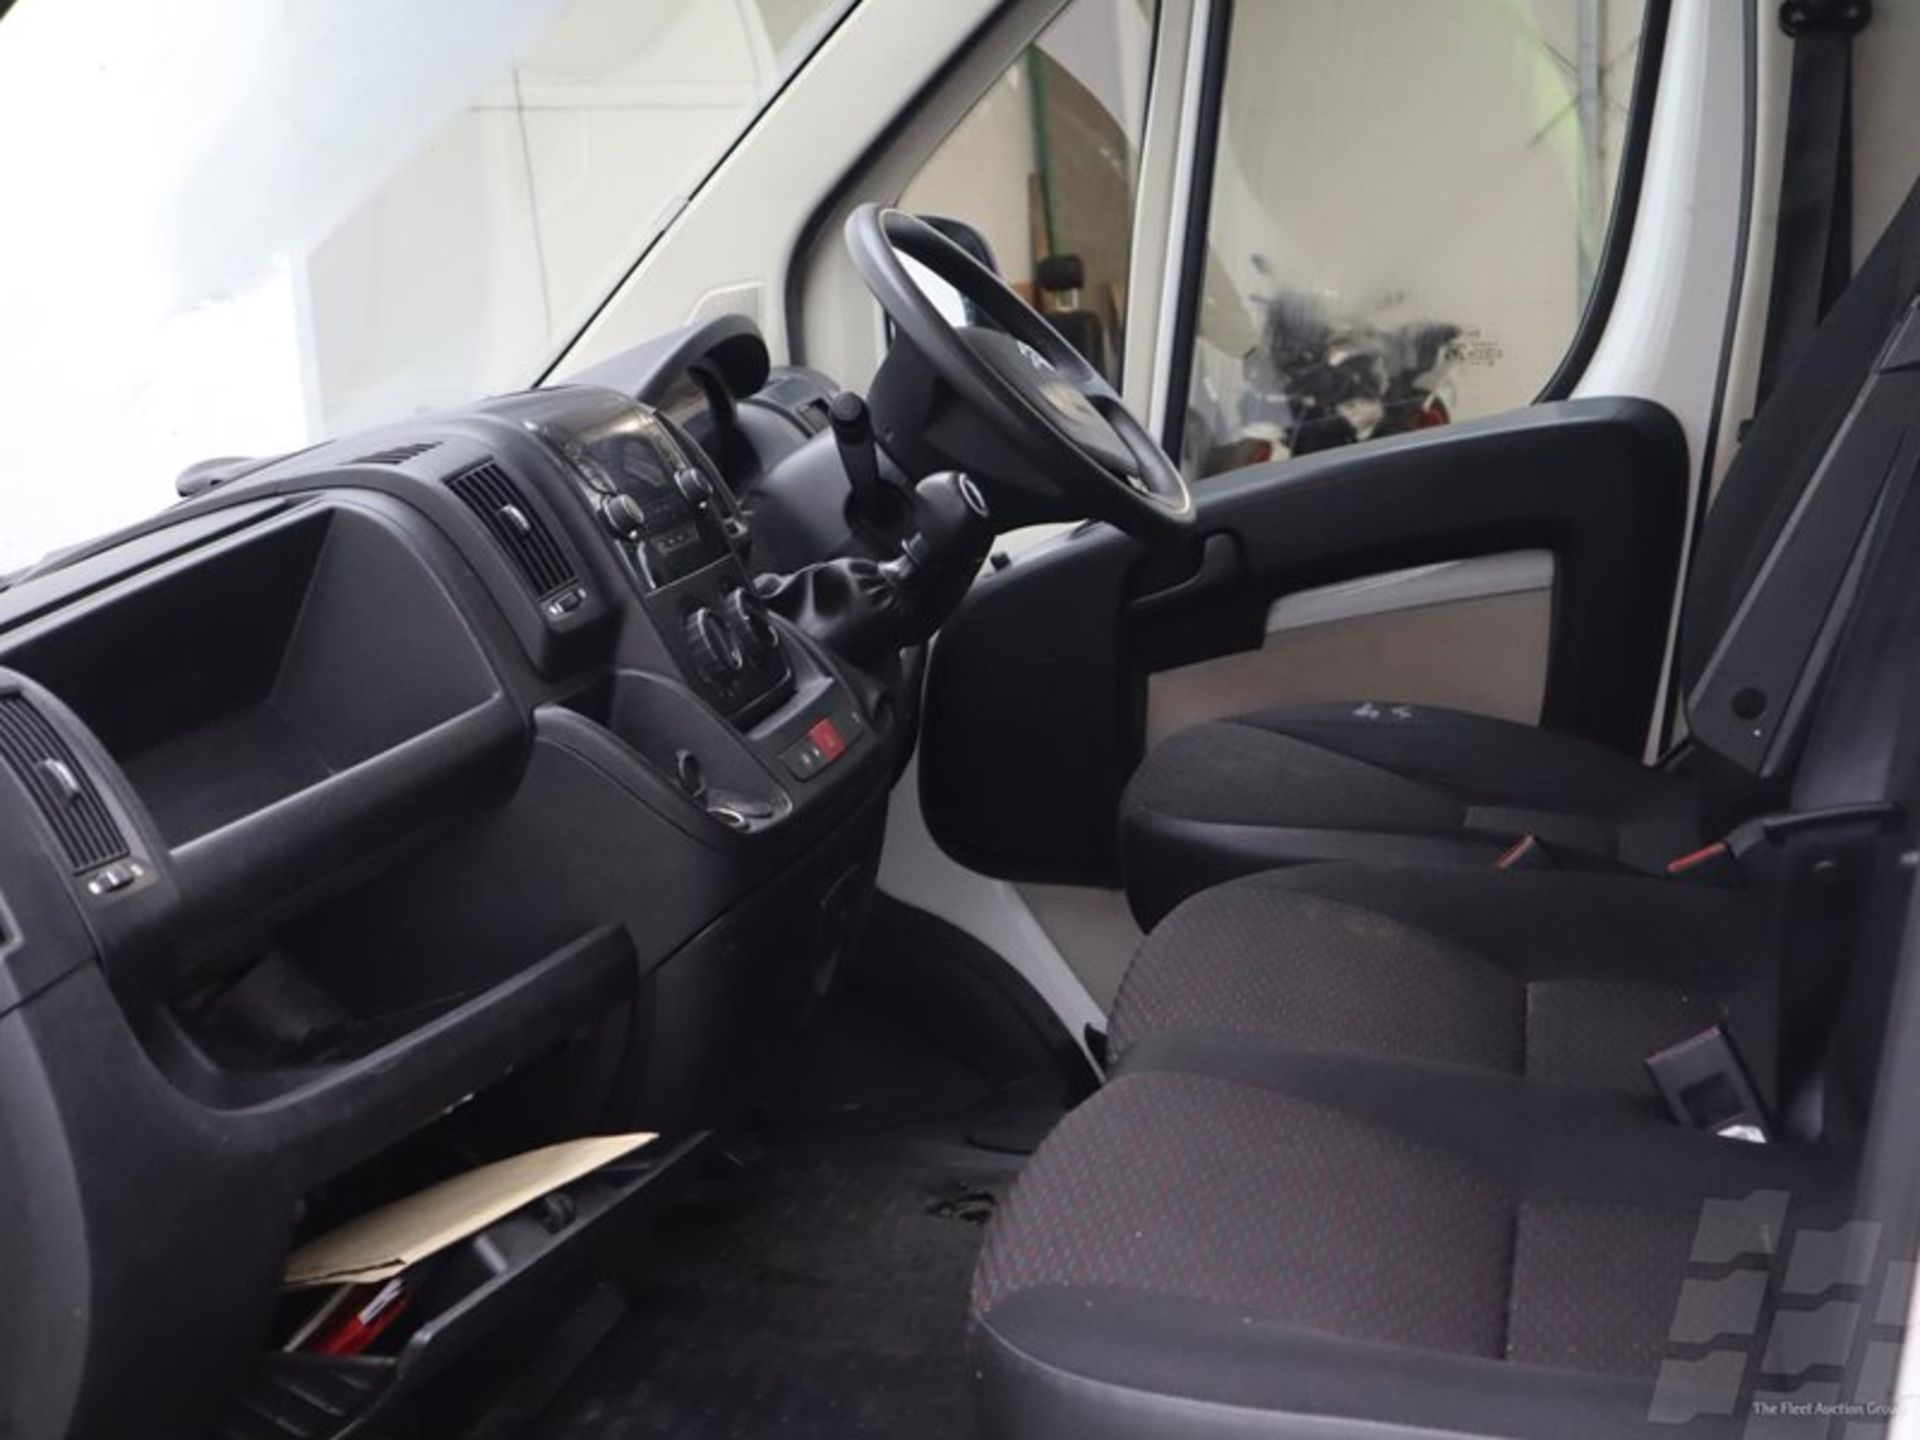 CITROEN RELAY 2.0HDI"160"LONG WHEEL BASE LUTON BOX VAN WITH ELECTRIC TAIL-LIFT -2020 MODEL -1 OWNER - Image 9 of 10